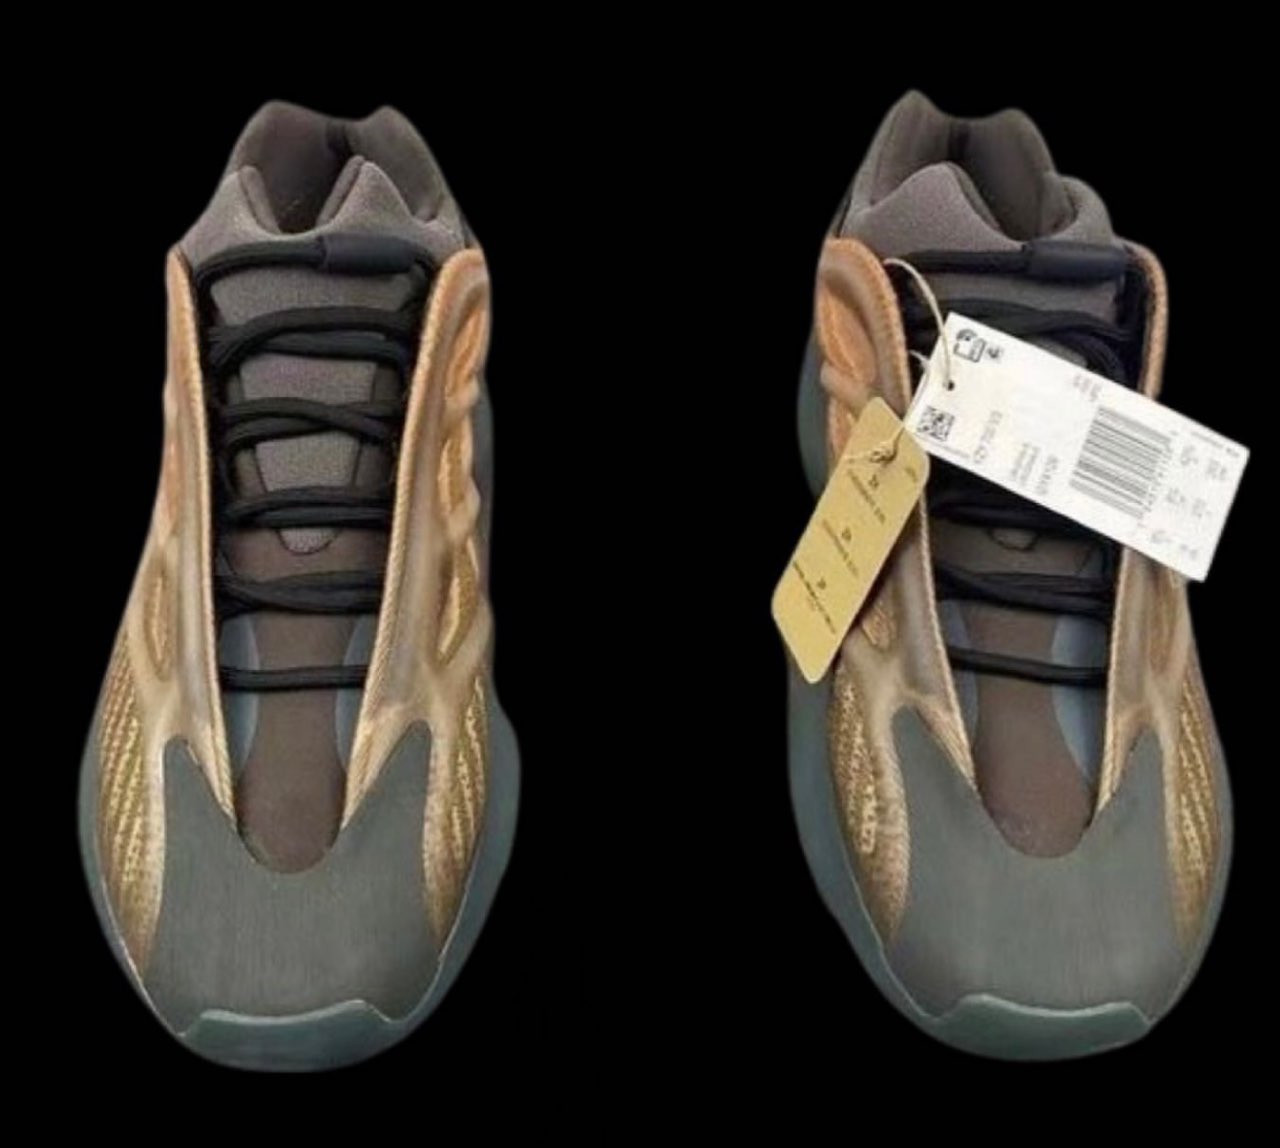 adidas Yeezy 700 V3 “Copper Fade”が国内12月10日に発売予定 | UP TO DATE